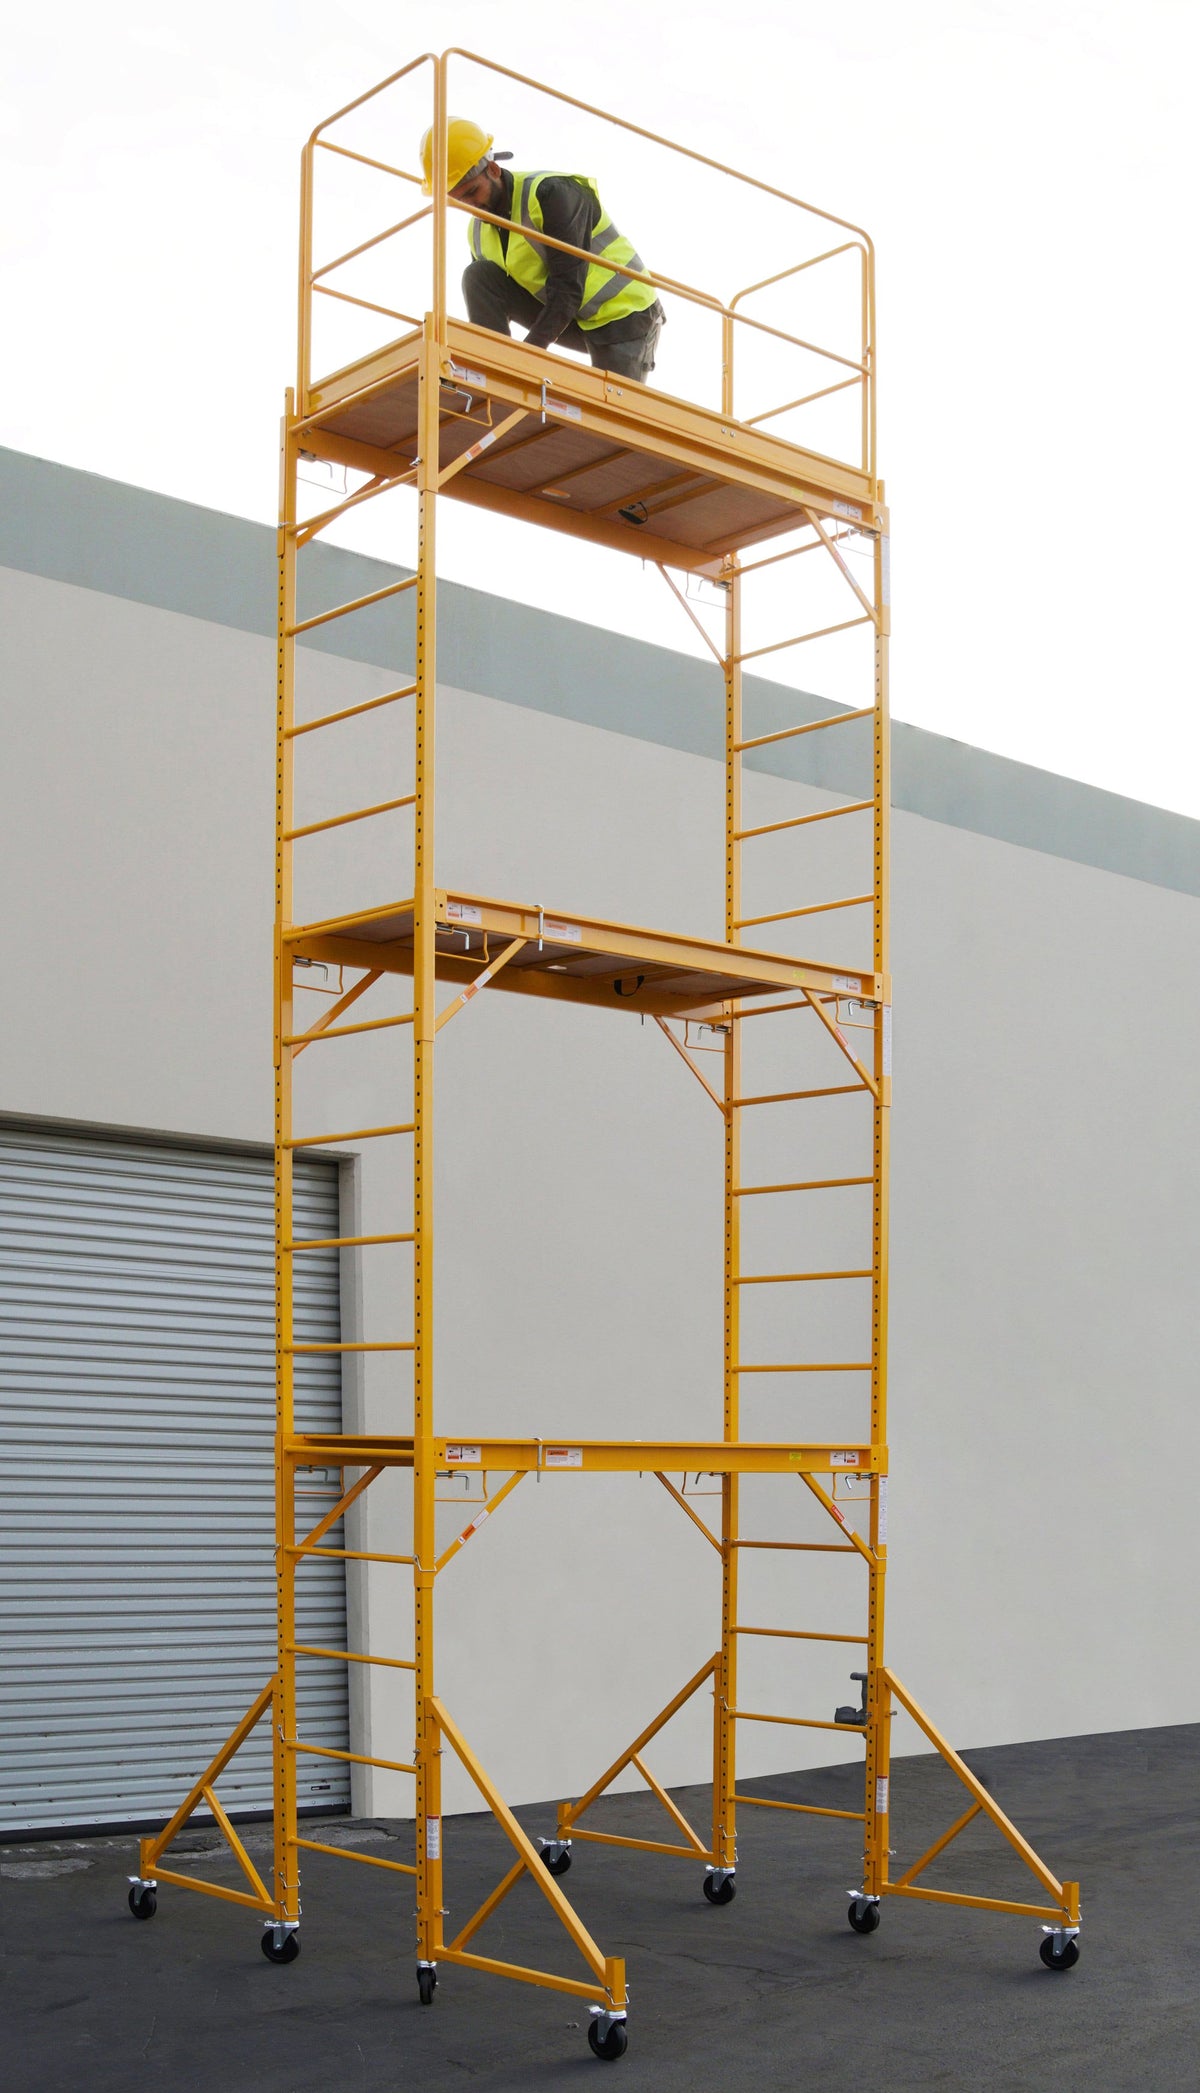 18 Ft High Rolling Scaffold Tower 3 Story 1000 lbs Capacity with 32" Swivel Outriggers